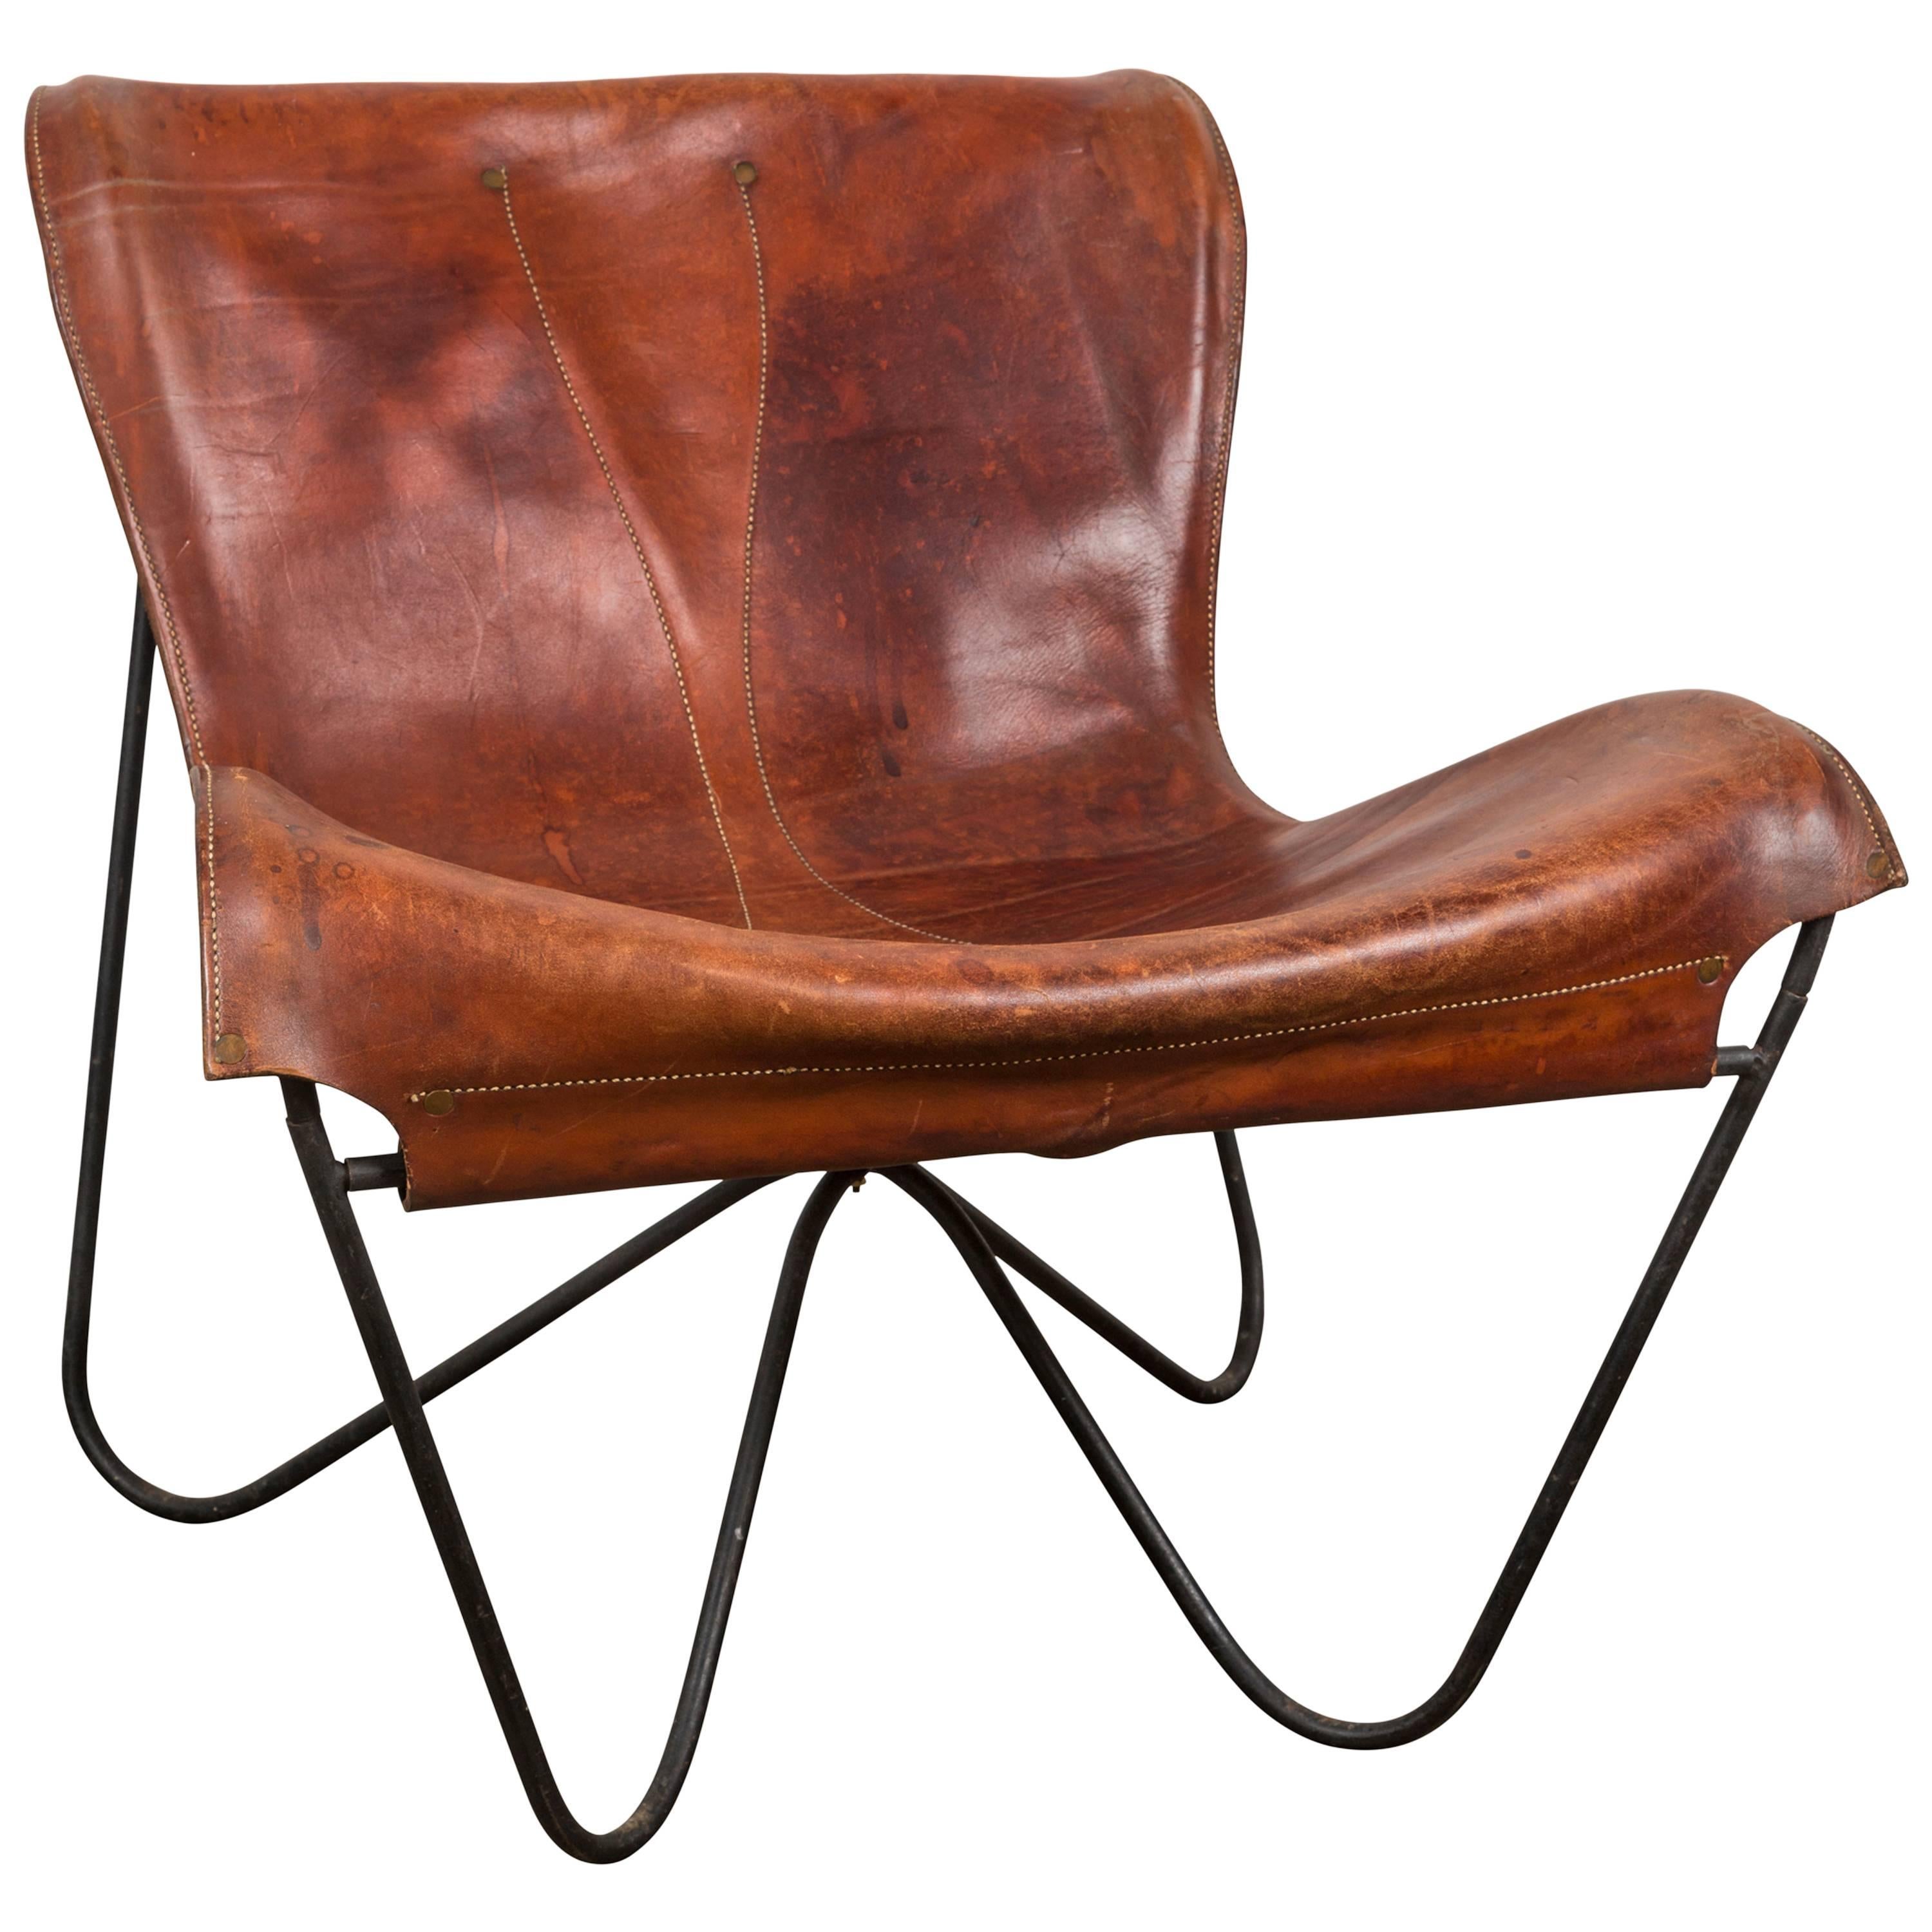 Patinated Leather Lounge Chair by Max Gottschalk